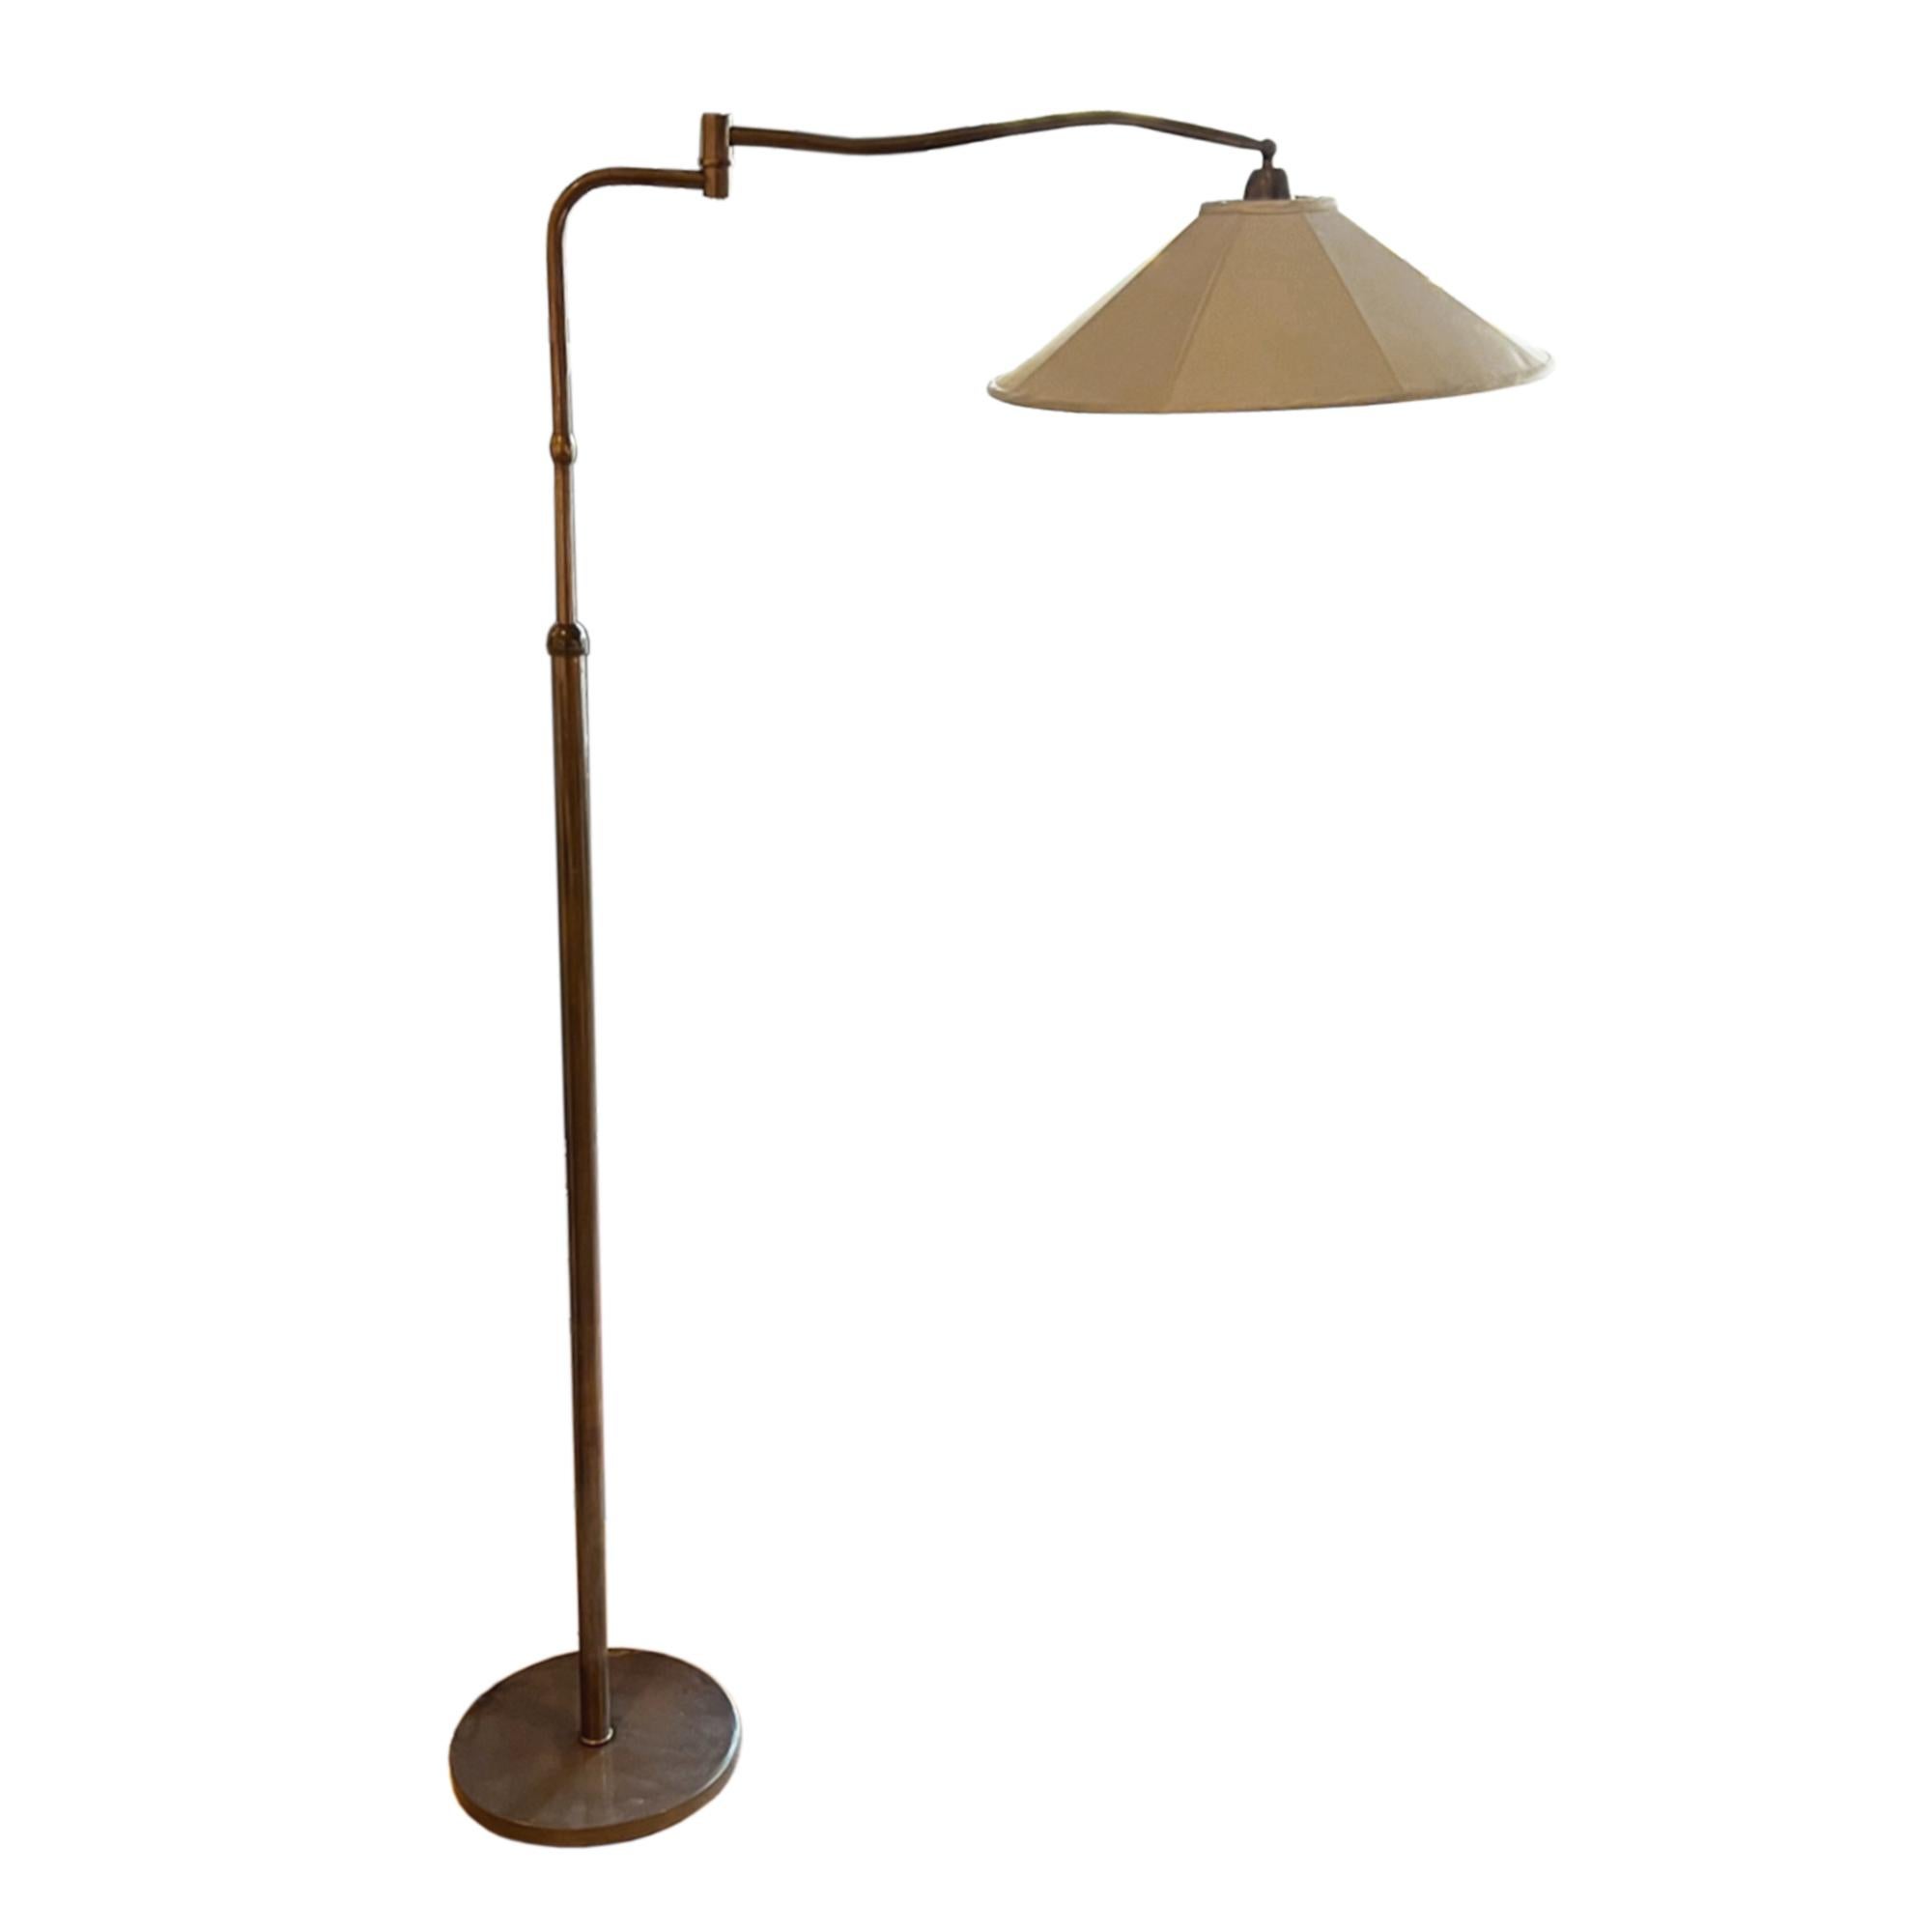 This is a classic Italian floor lamp, with a heavy base and with a moving arm. 

Made from brass which has a deep rose gold patina. 

Fully adjustable, making this lamp practical as well as decorative.

Rewired for the UK using black rope twisted